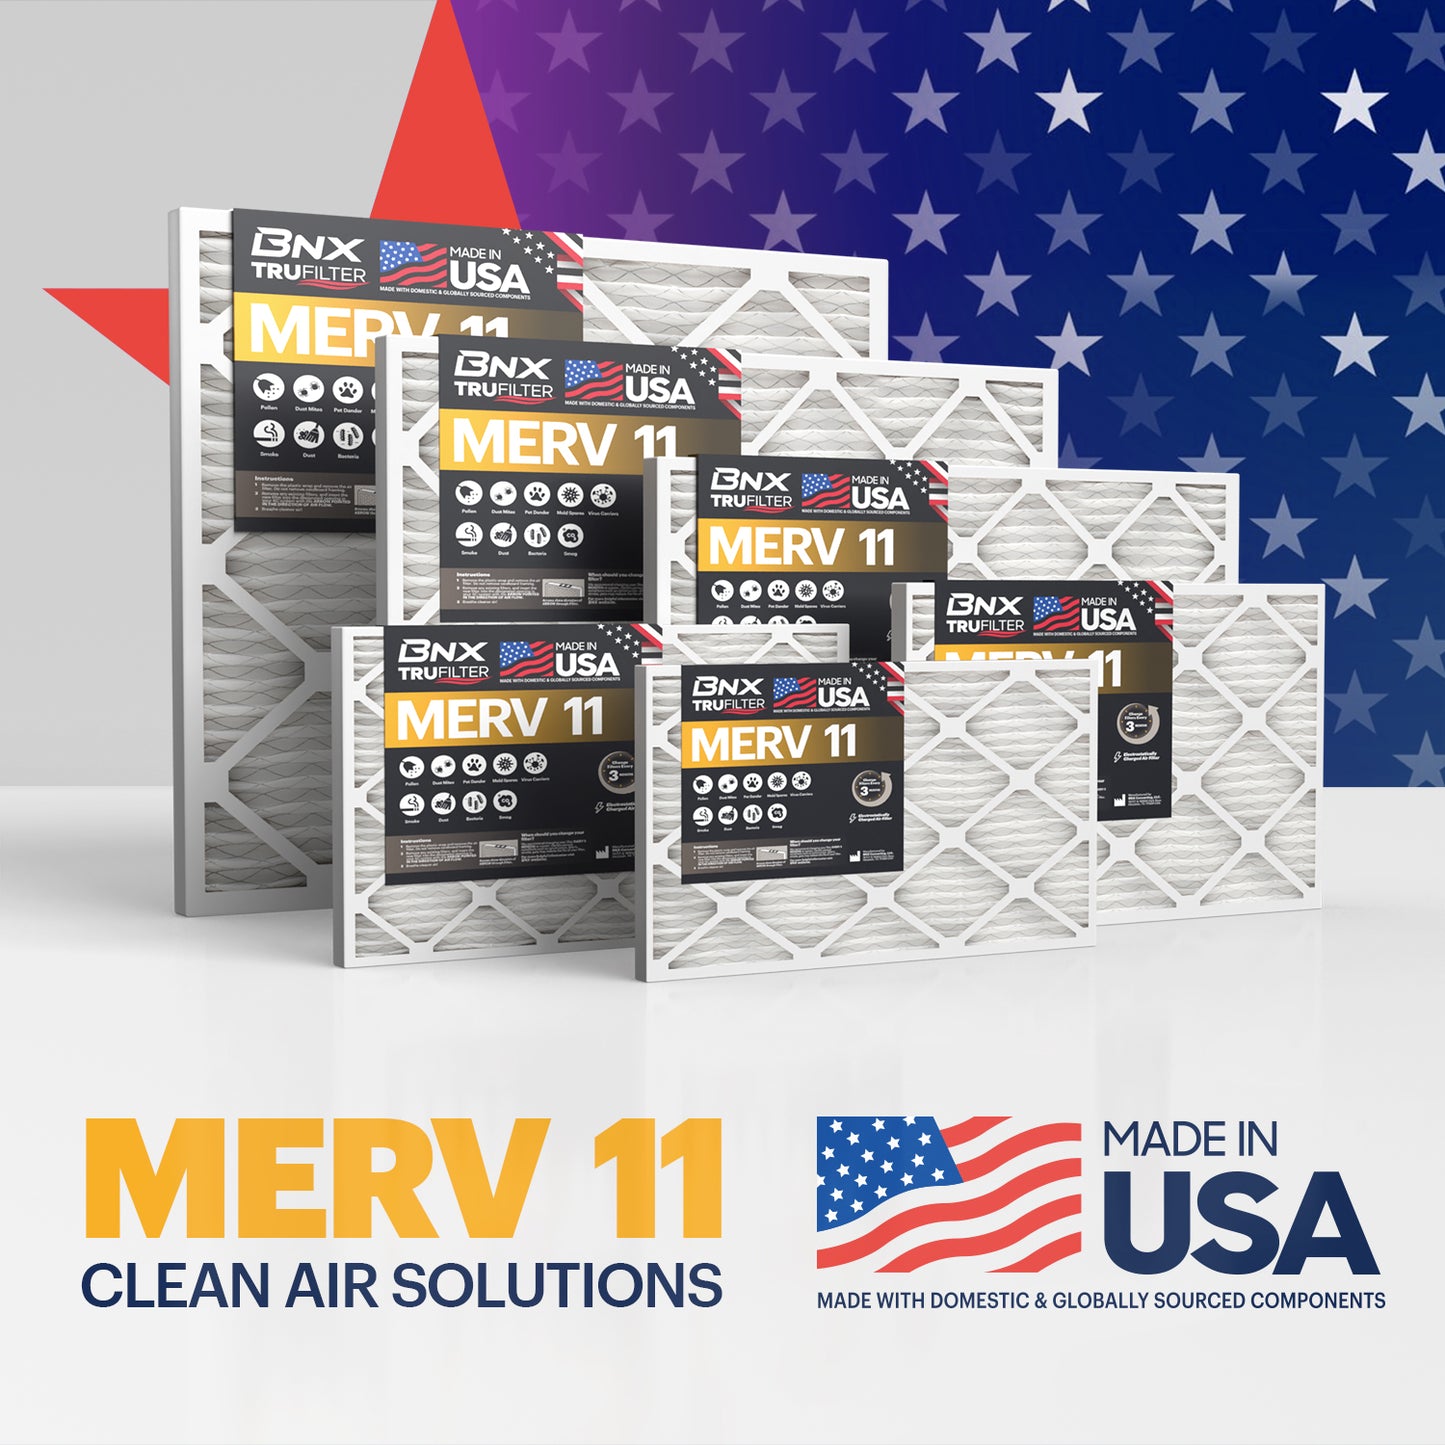 BNX TruFilter 20x23x1 Air Filter MERV 11 (12-Pack)- MADE IN USA - Allergen Defense Electrostatic Pleated Air Conditioner HVAC AC Furnace Filters for Allergies, Dust, Pet, Smoke, Allergy MPR 1200 FPR 7